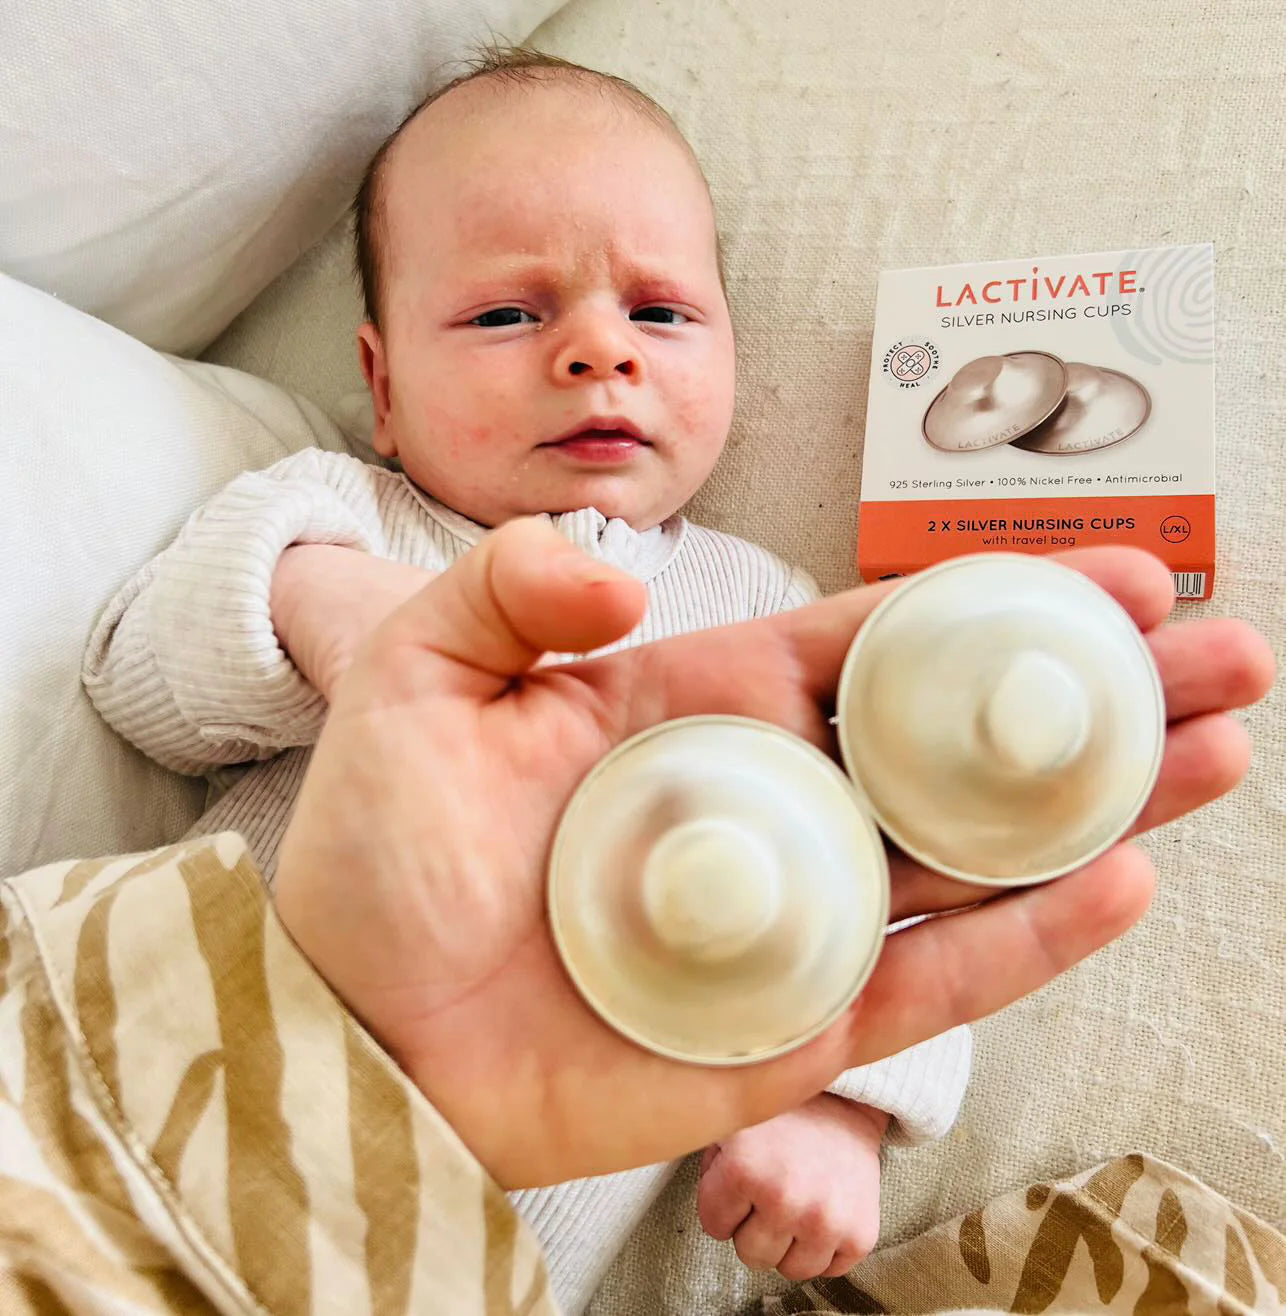 Lactivate Silver Nursing Cups S/M - Tiny Tots Baby Store 